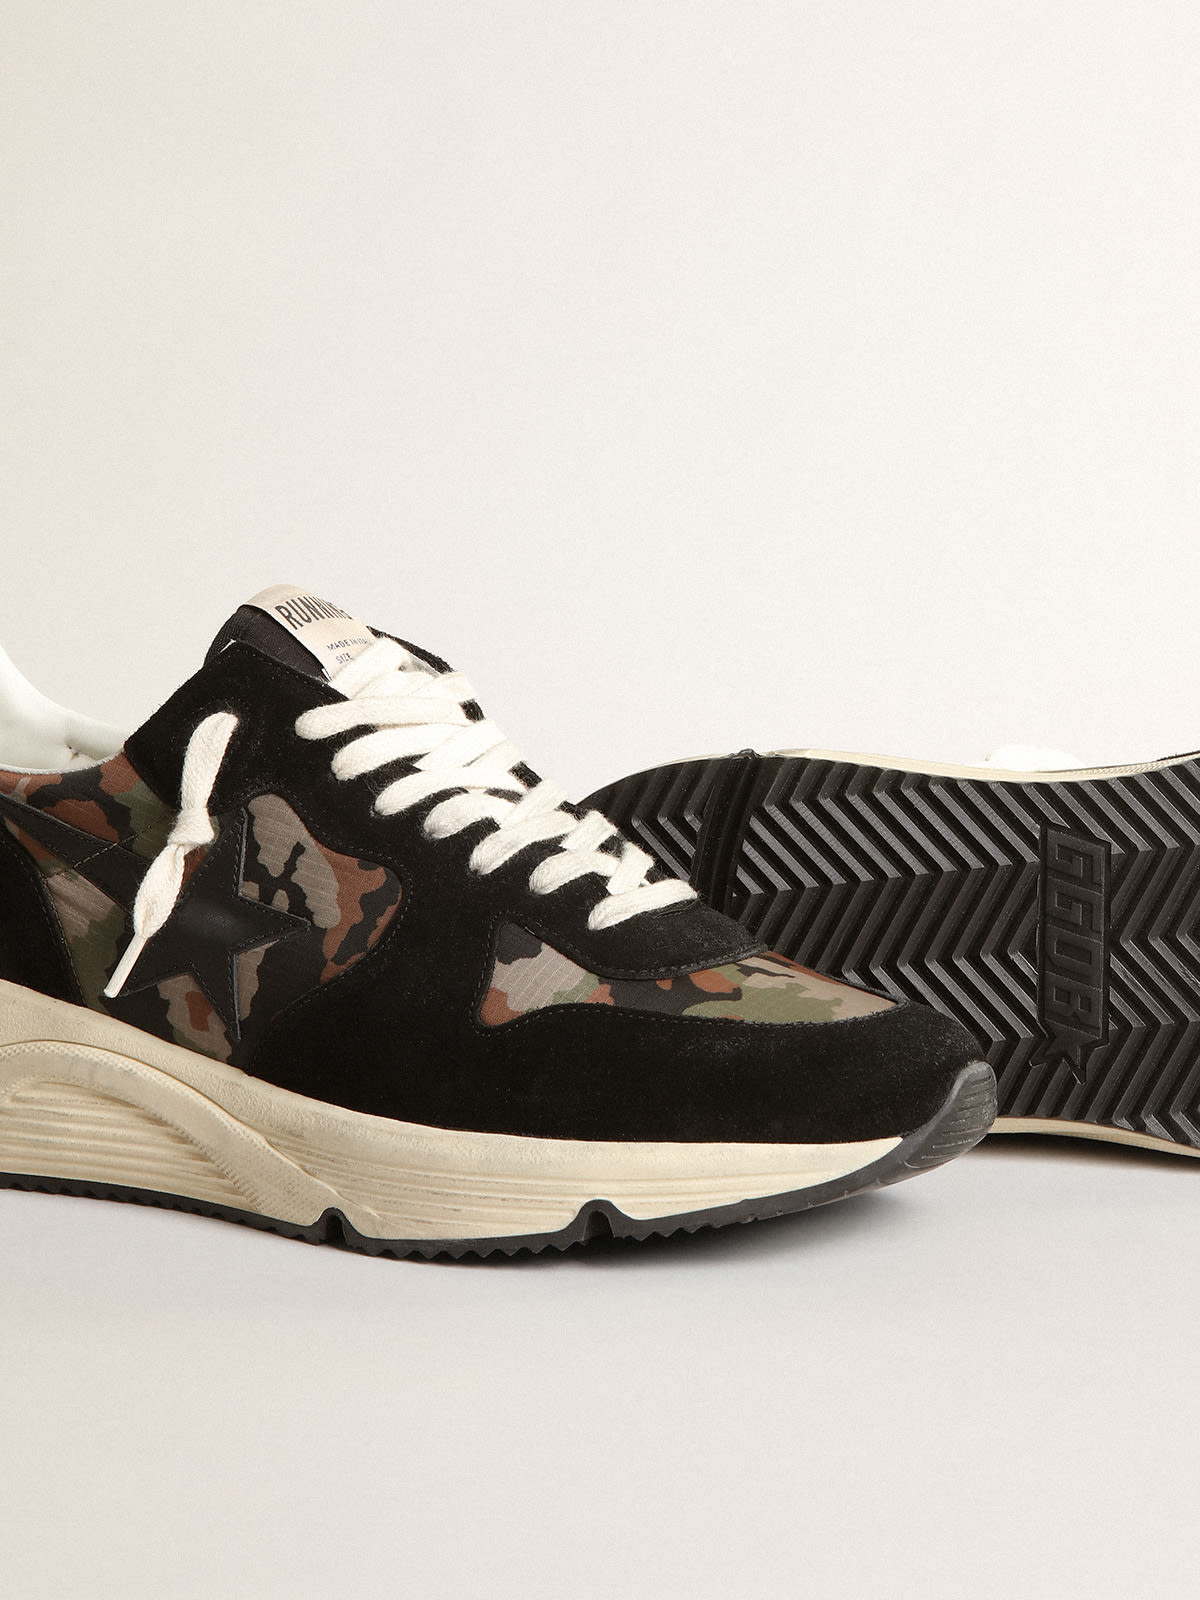 Golden Goose - Men's Running Sole in nylon ripstop with camouflage print in 